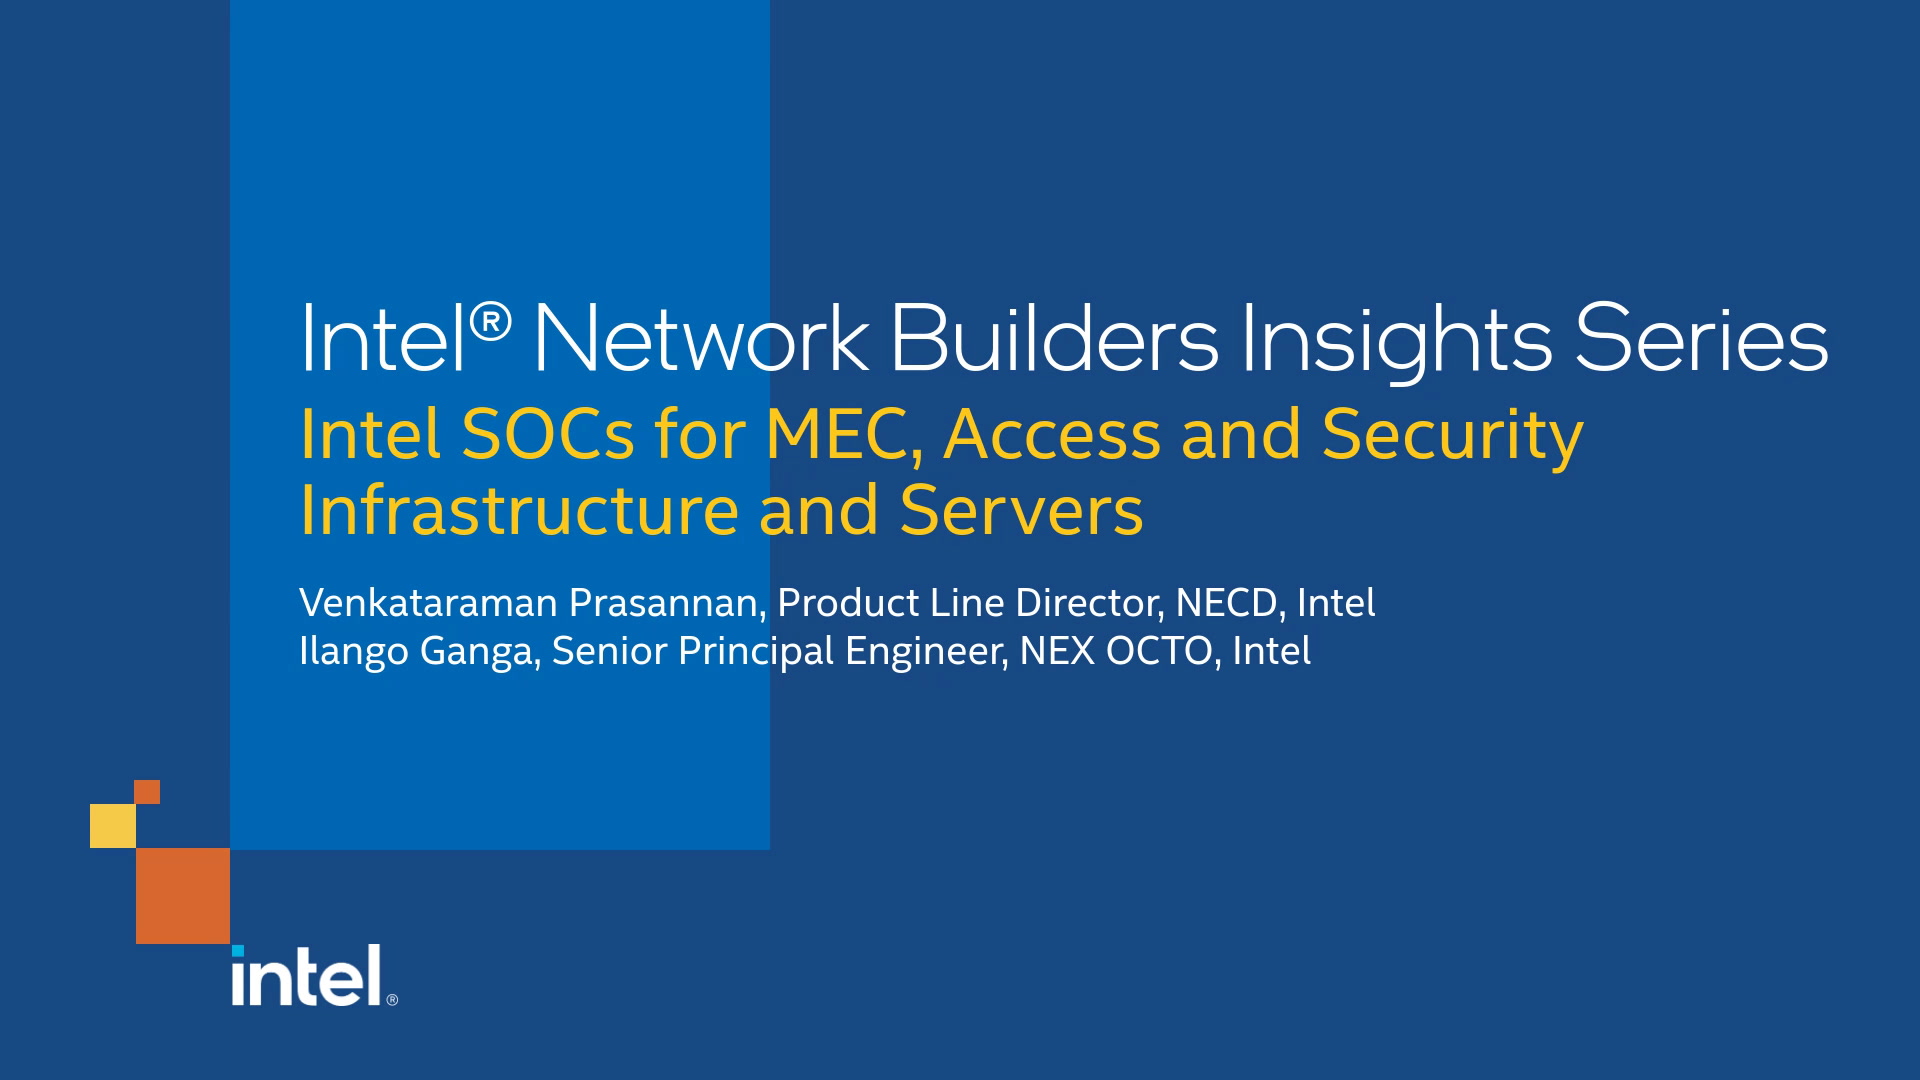 Intel SOCs for MEC, Access and Security Infrastructure and Servers